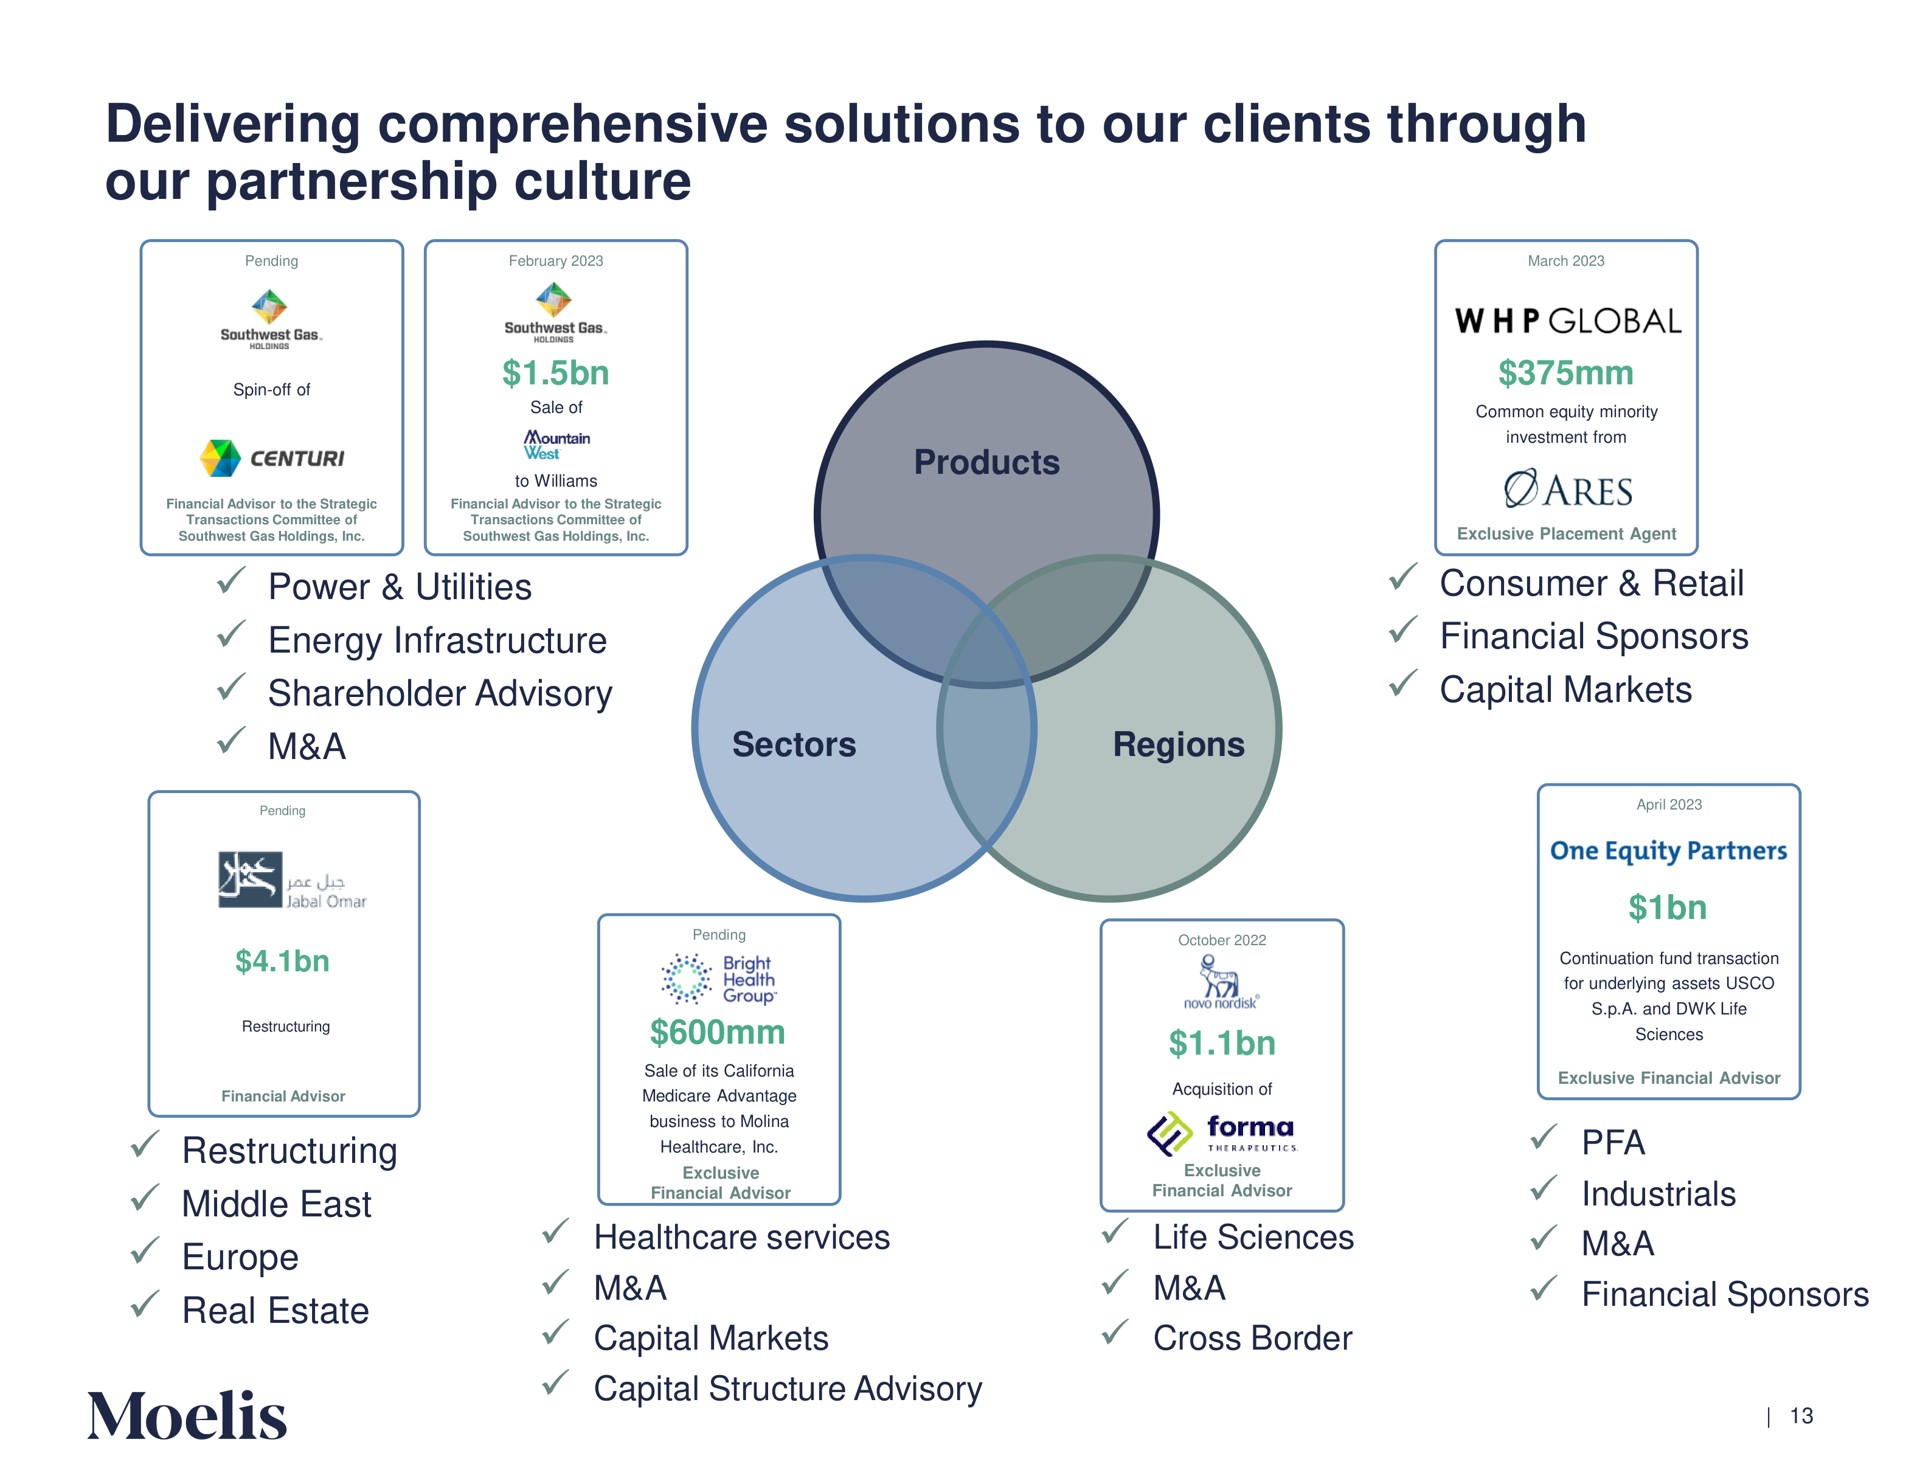 delivering comprehensive solutions to our clients through our partnership culture power utilities energy infrastructure shareholder advisory a a a ares exclusive placement agent retail consumer financial sponsors capital markets financial sponsors | Moelis & Company